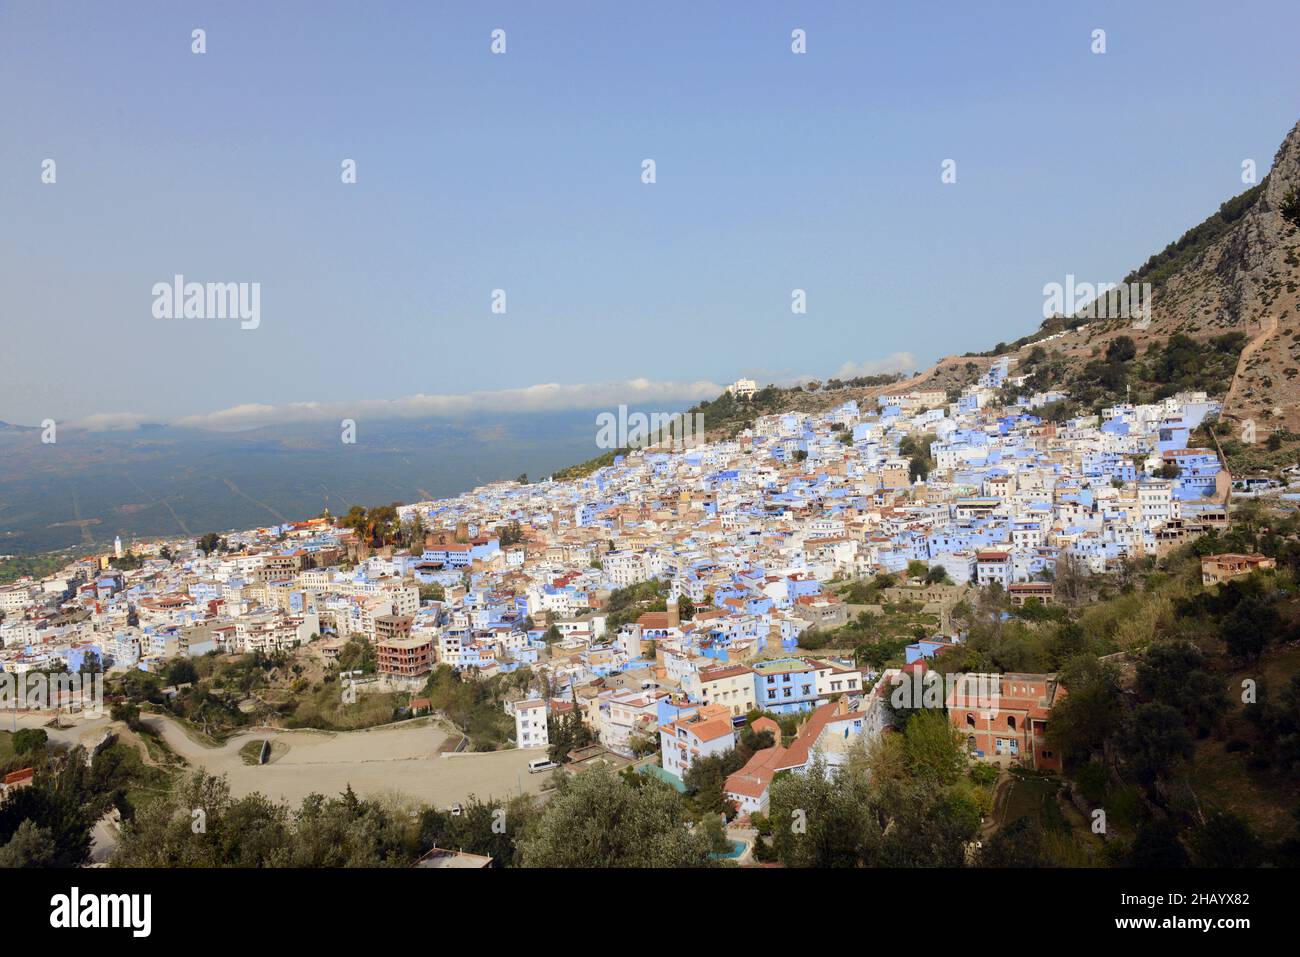 View of the Blue City of Chefchouen in the Rif mountains in Morocco. Stock Photo